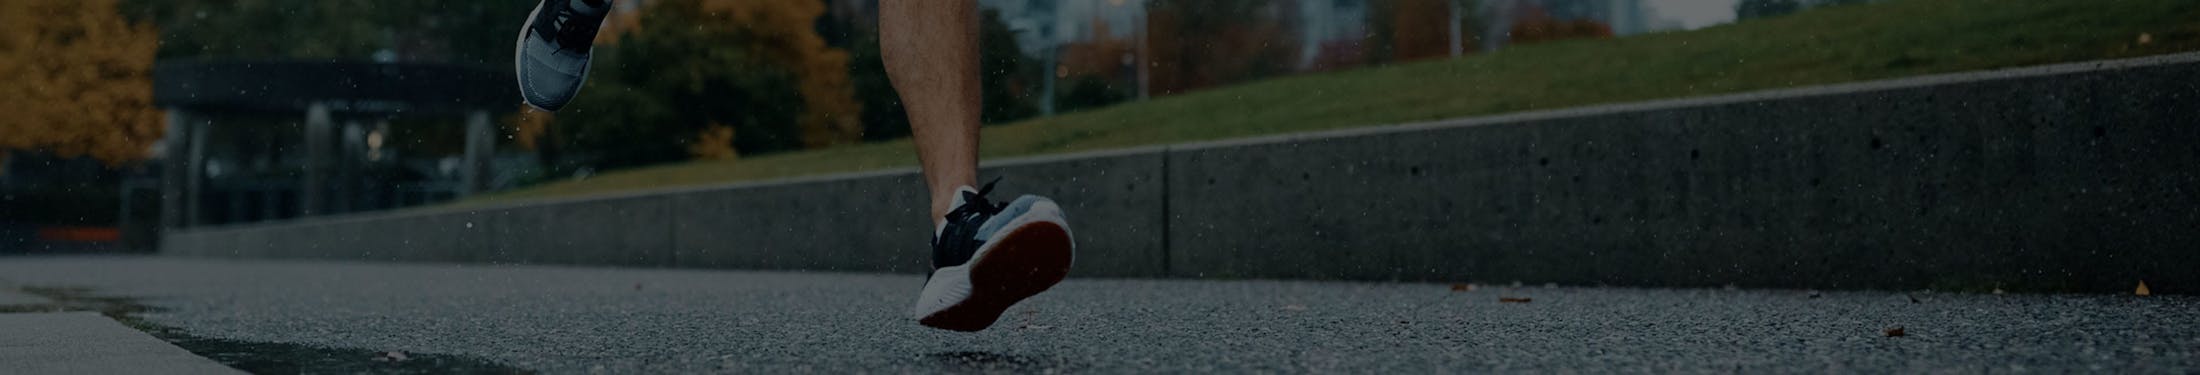 person's feet while running